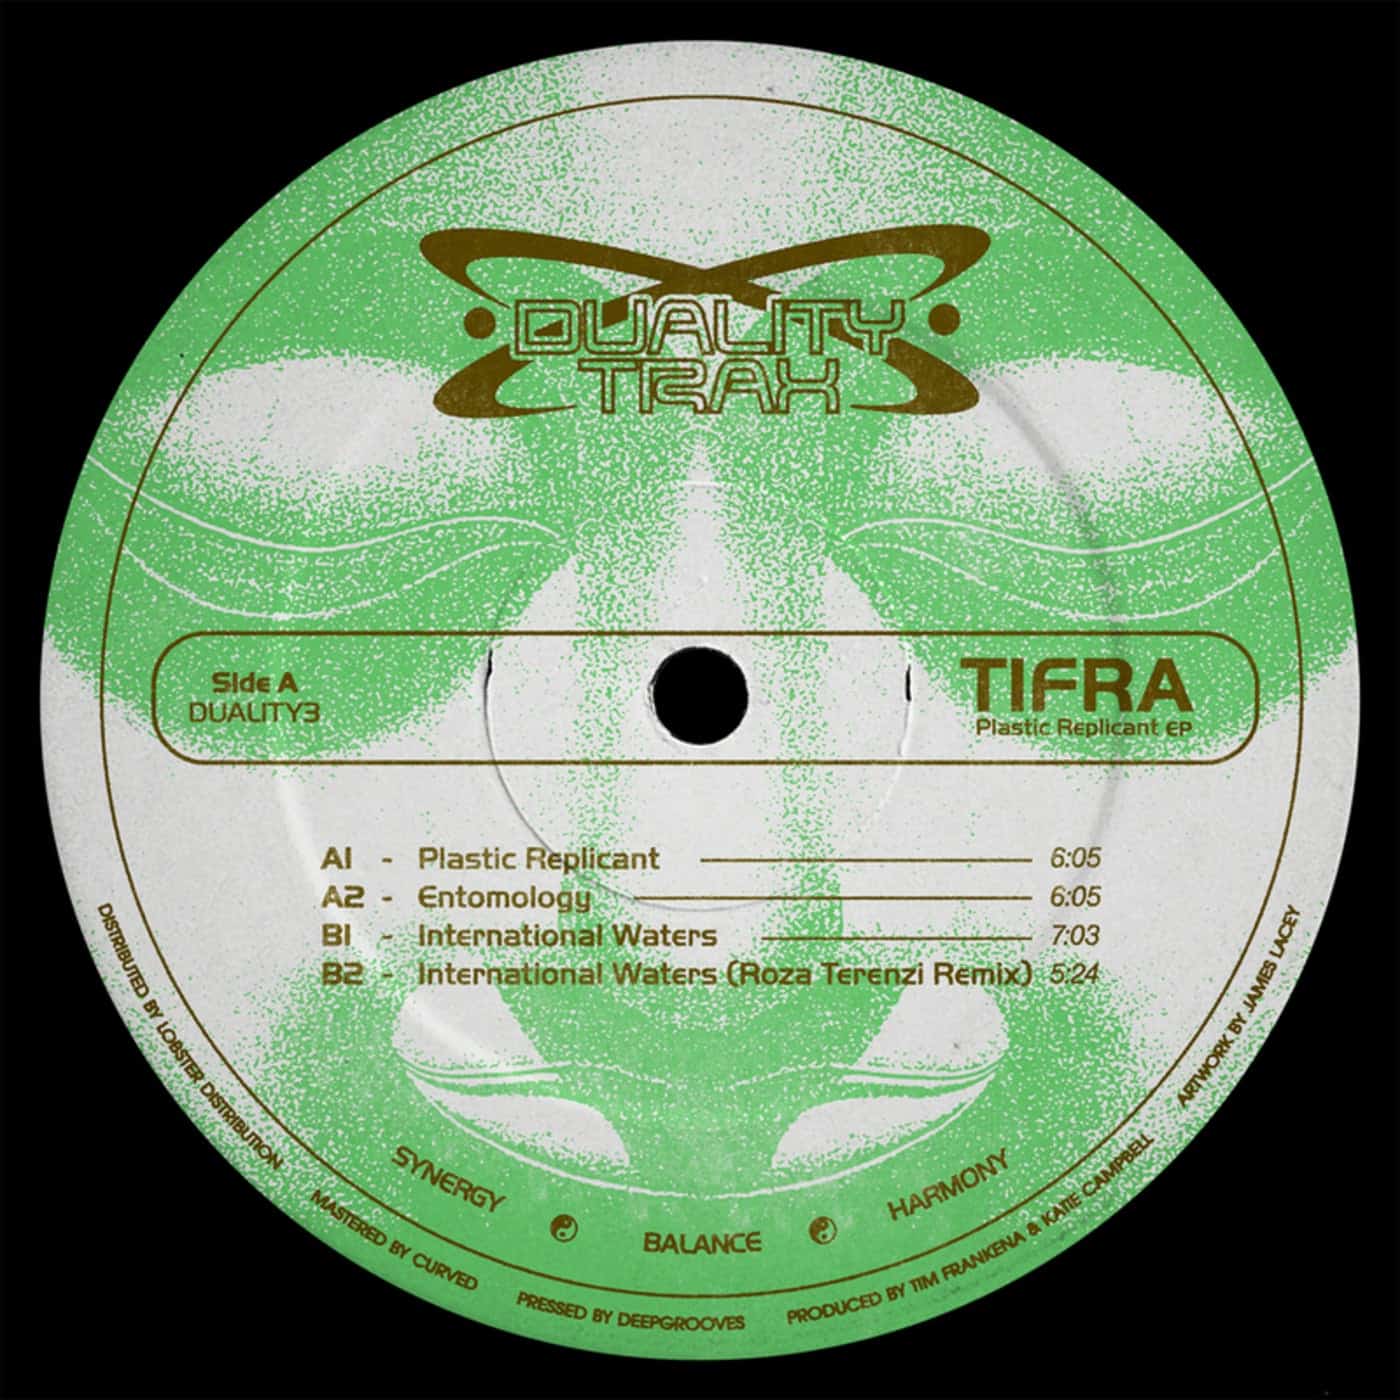 Download Tifra - Plastic Replicant EP on Electrobuzz